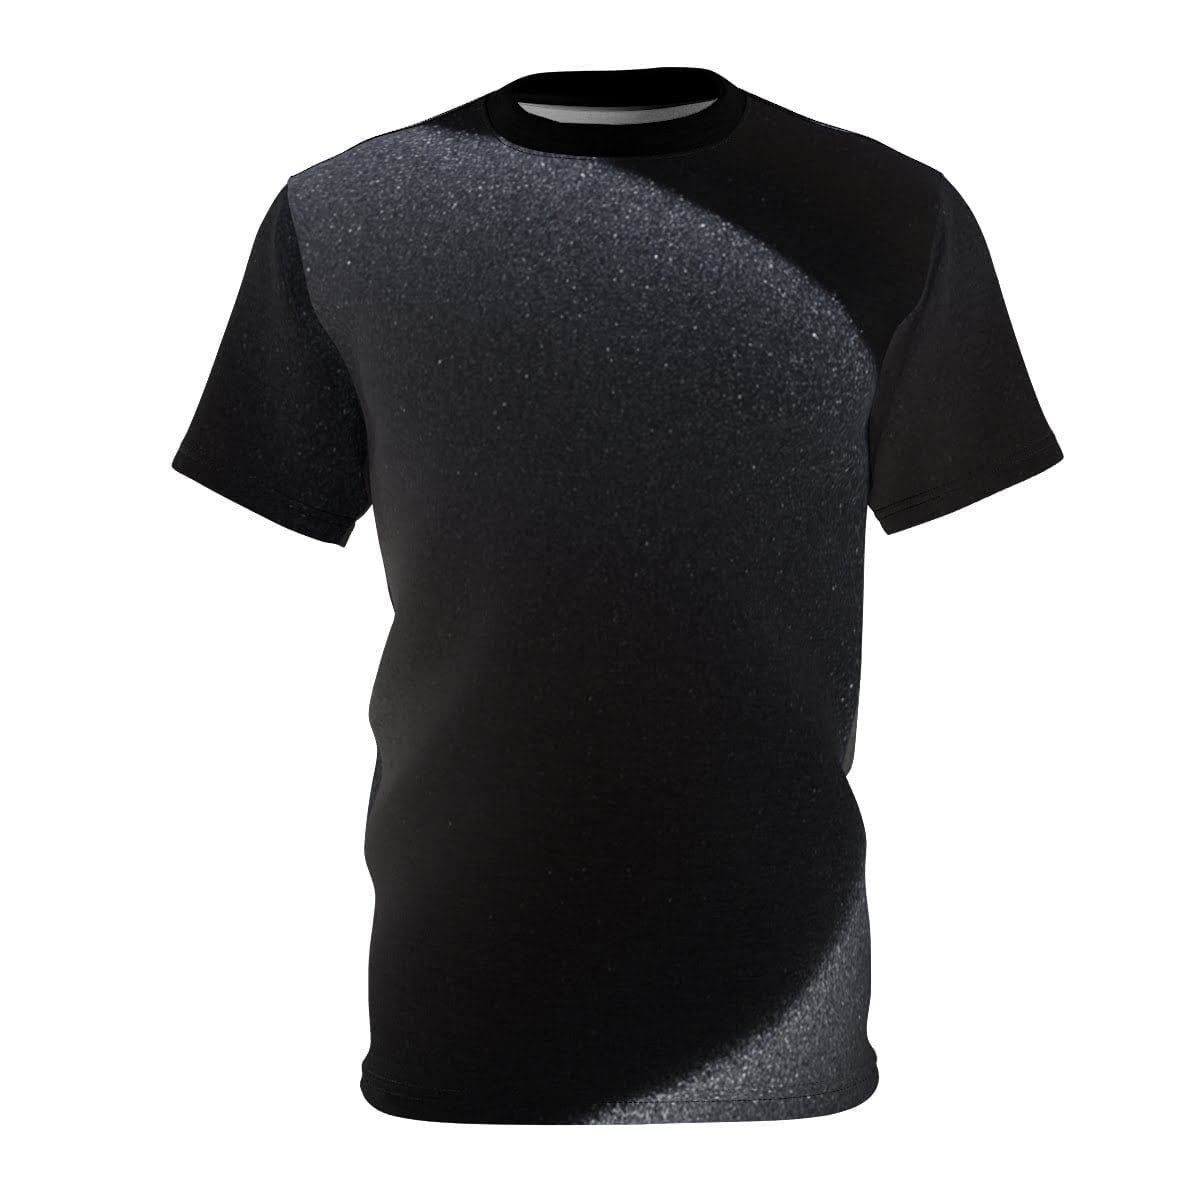 - iPhone 15 Pro T-shirt (Black) - Unisex Cut & Sew Tee with iPhone 15 Pro style - NoowAI Shop